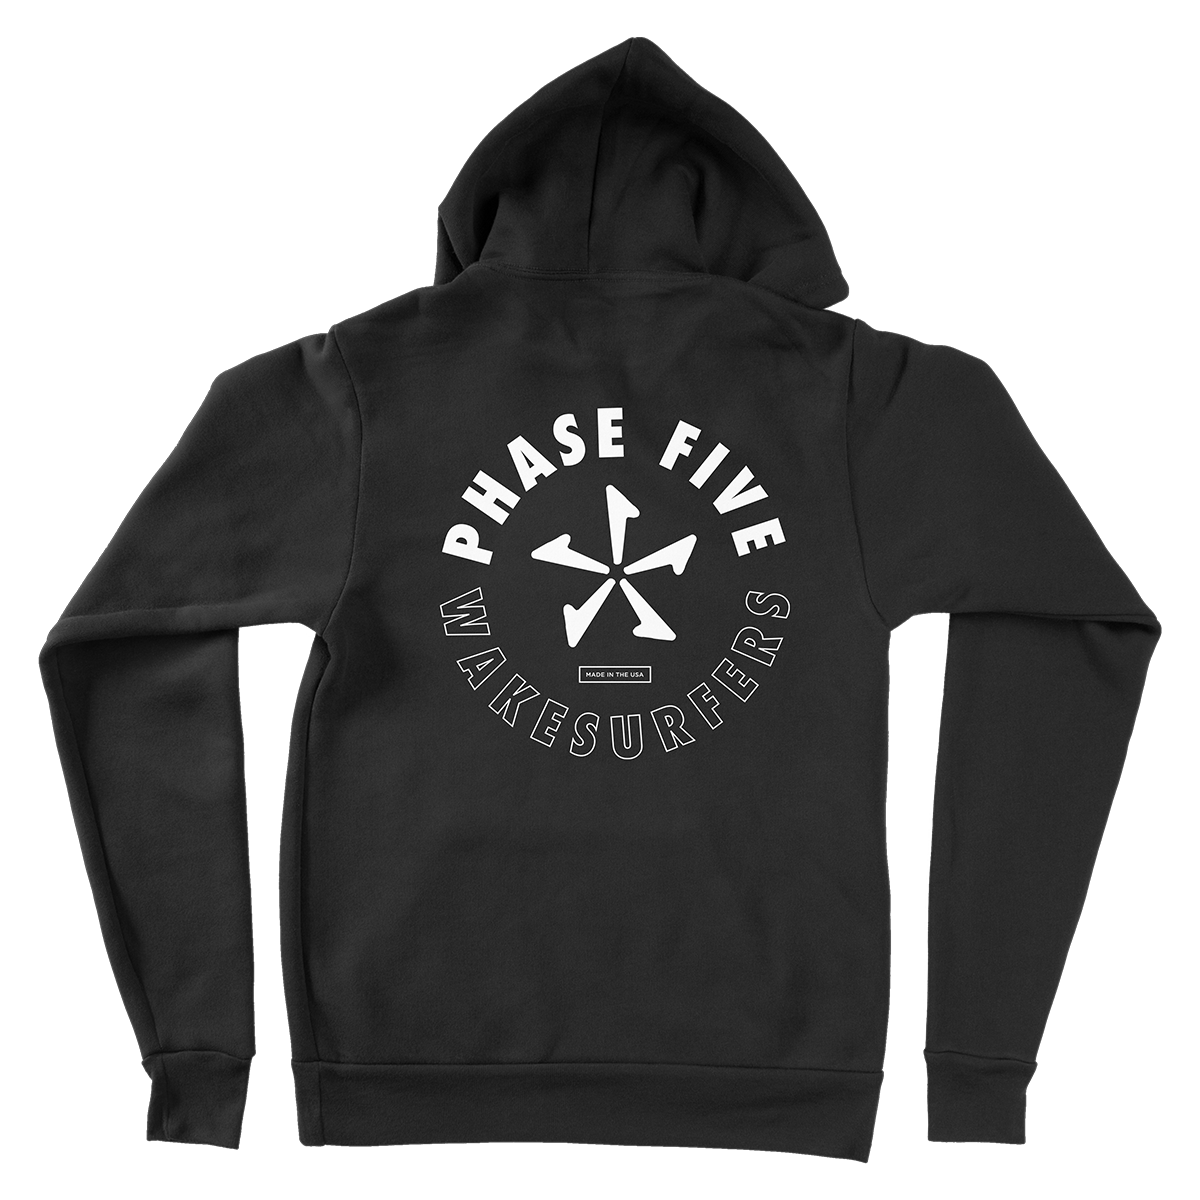 Phase 5 USA Made Fleece Pullover Hoodie in Black - BoardCo